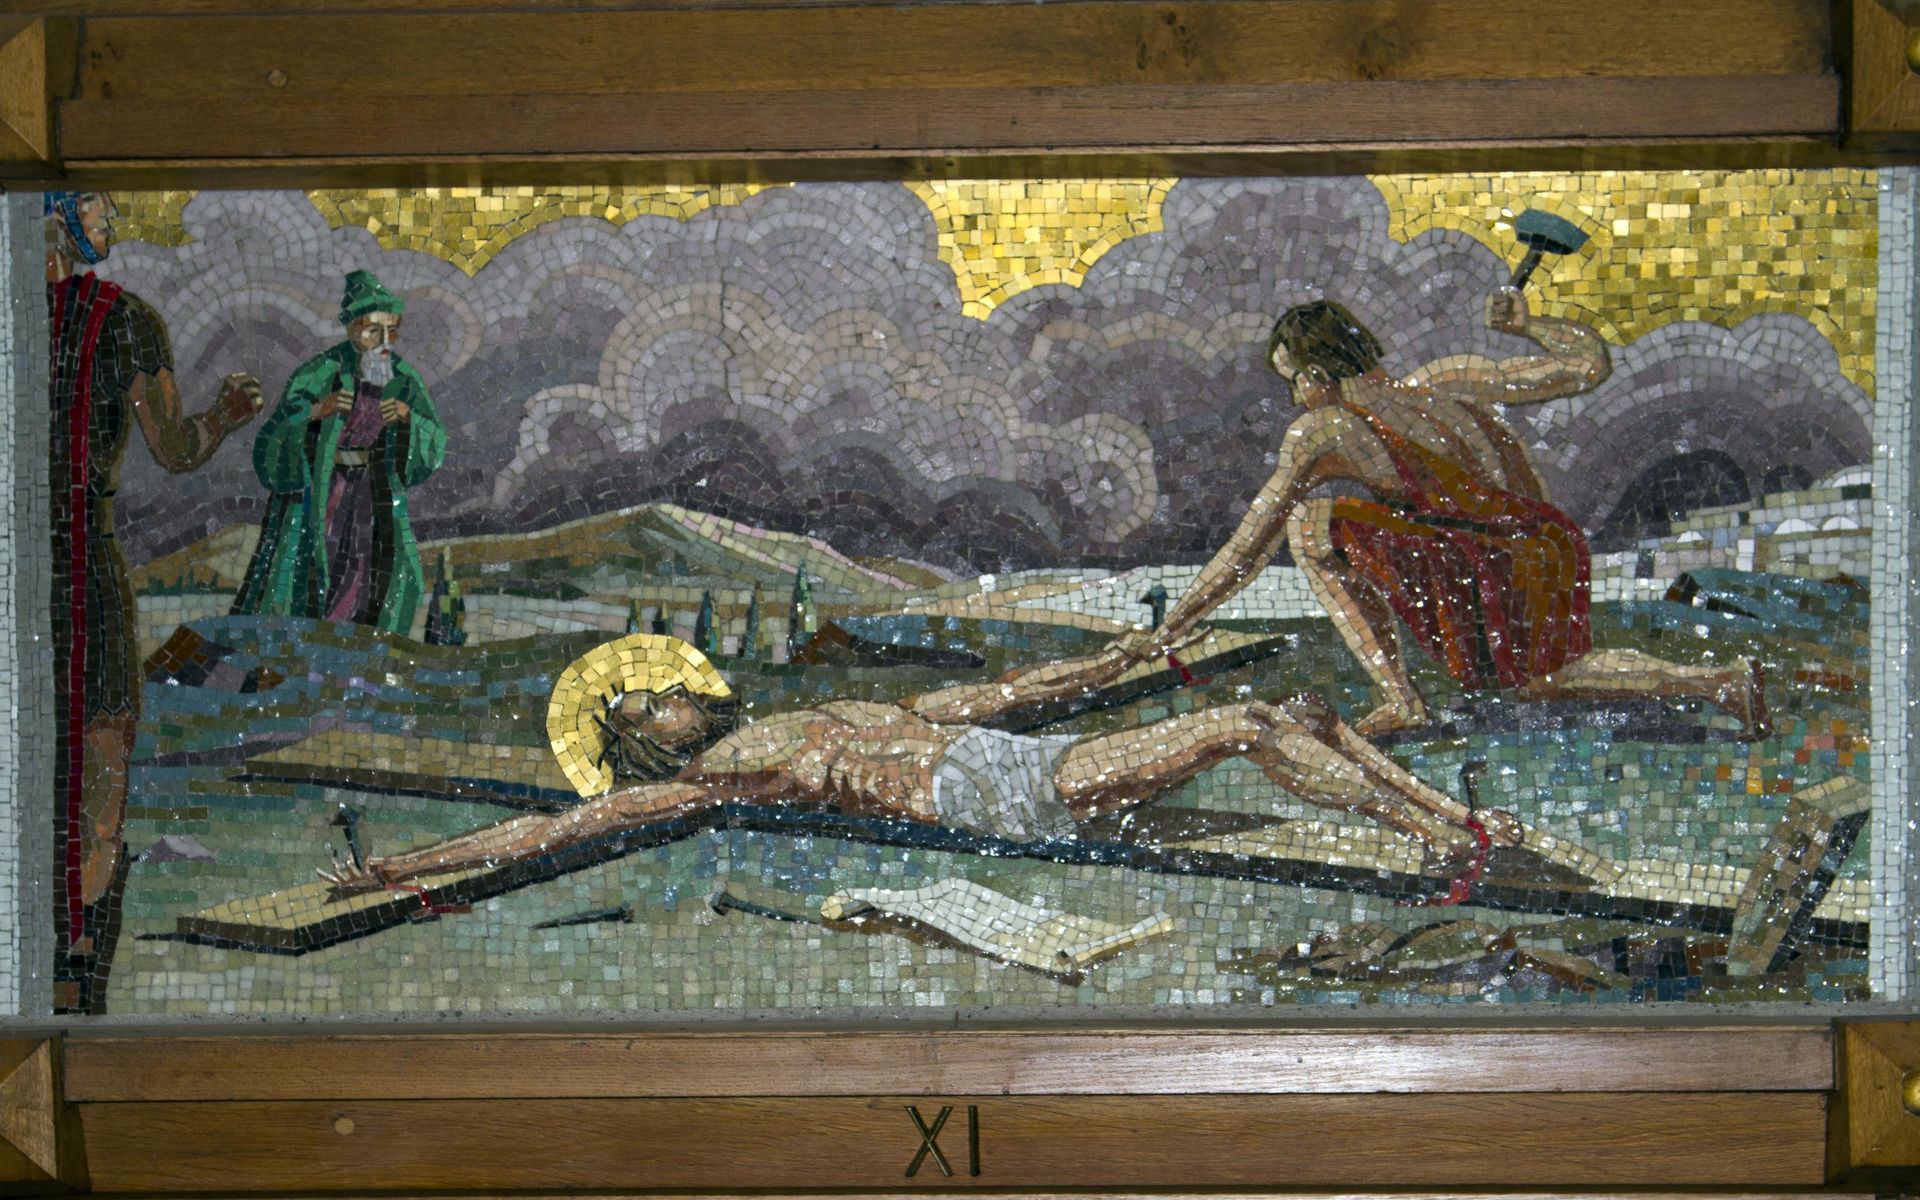 A mosaic painting of jesus laying on the cross.